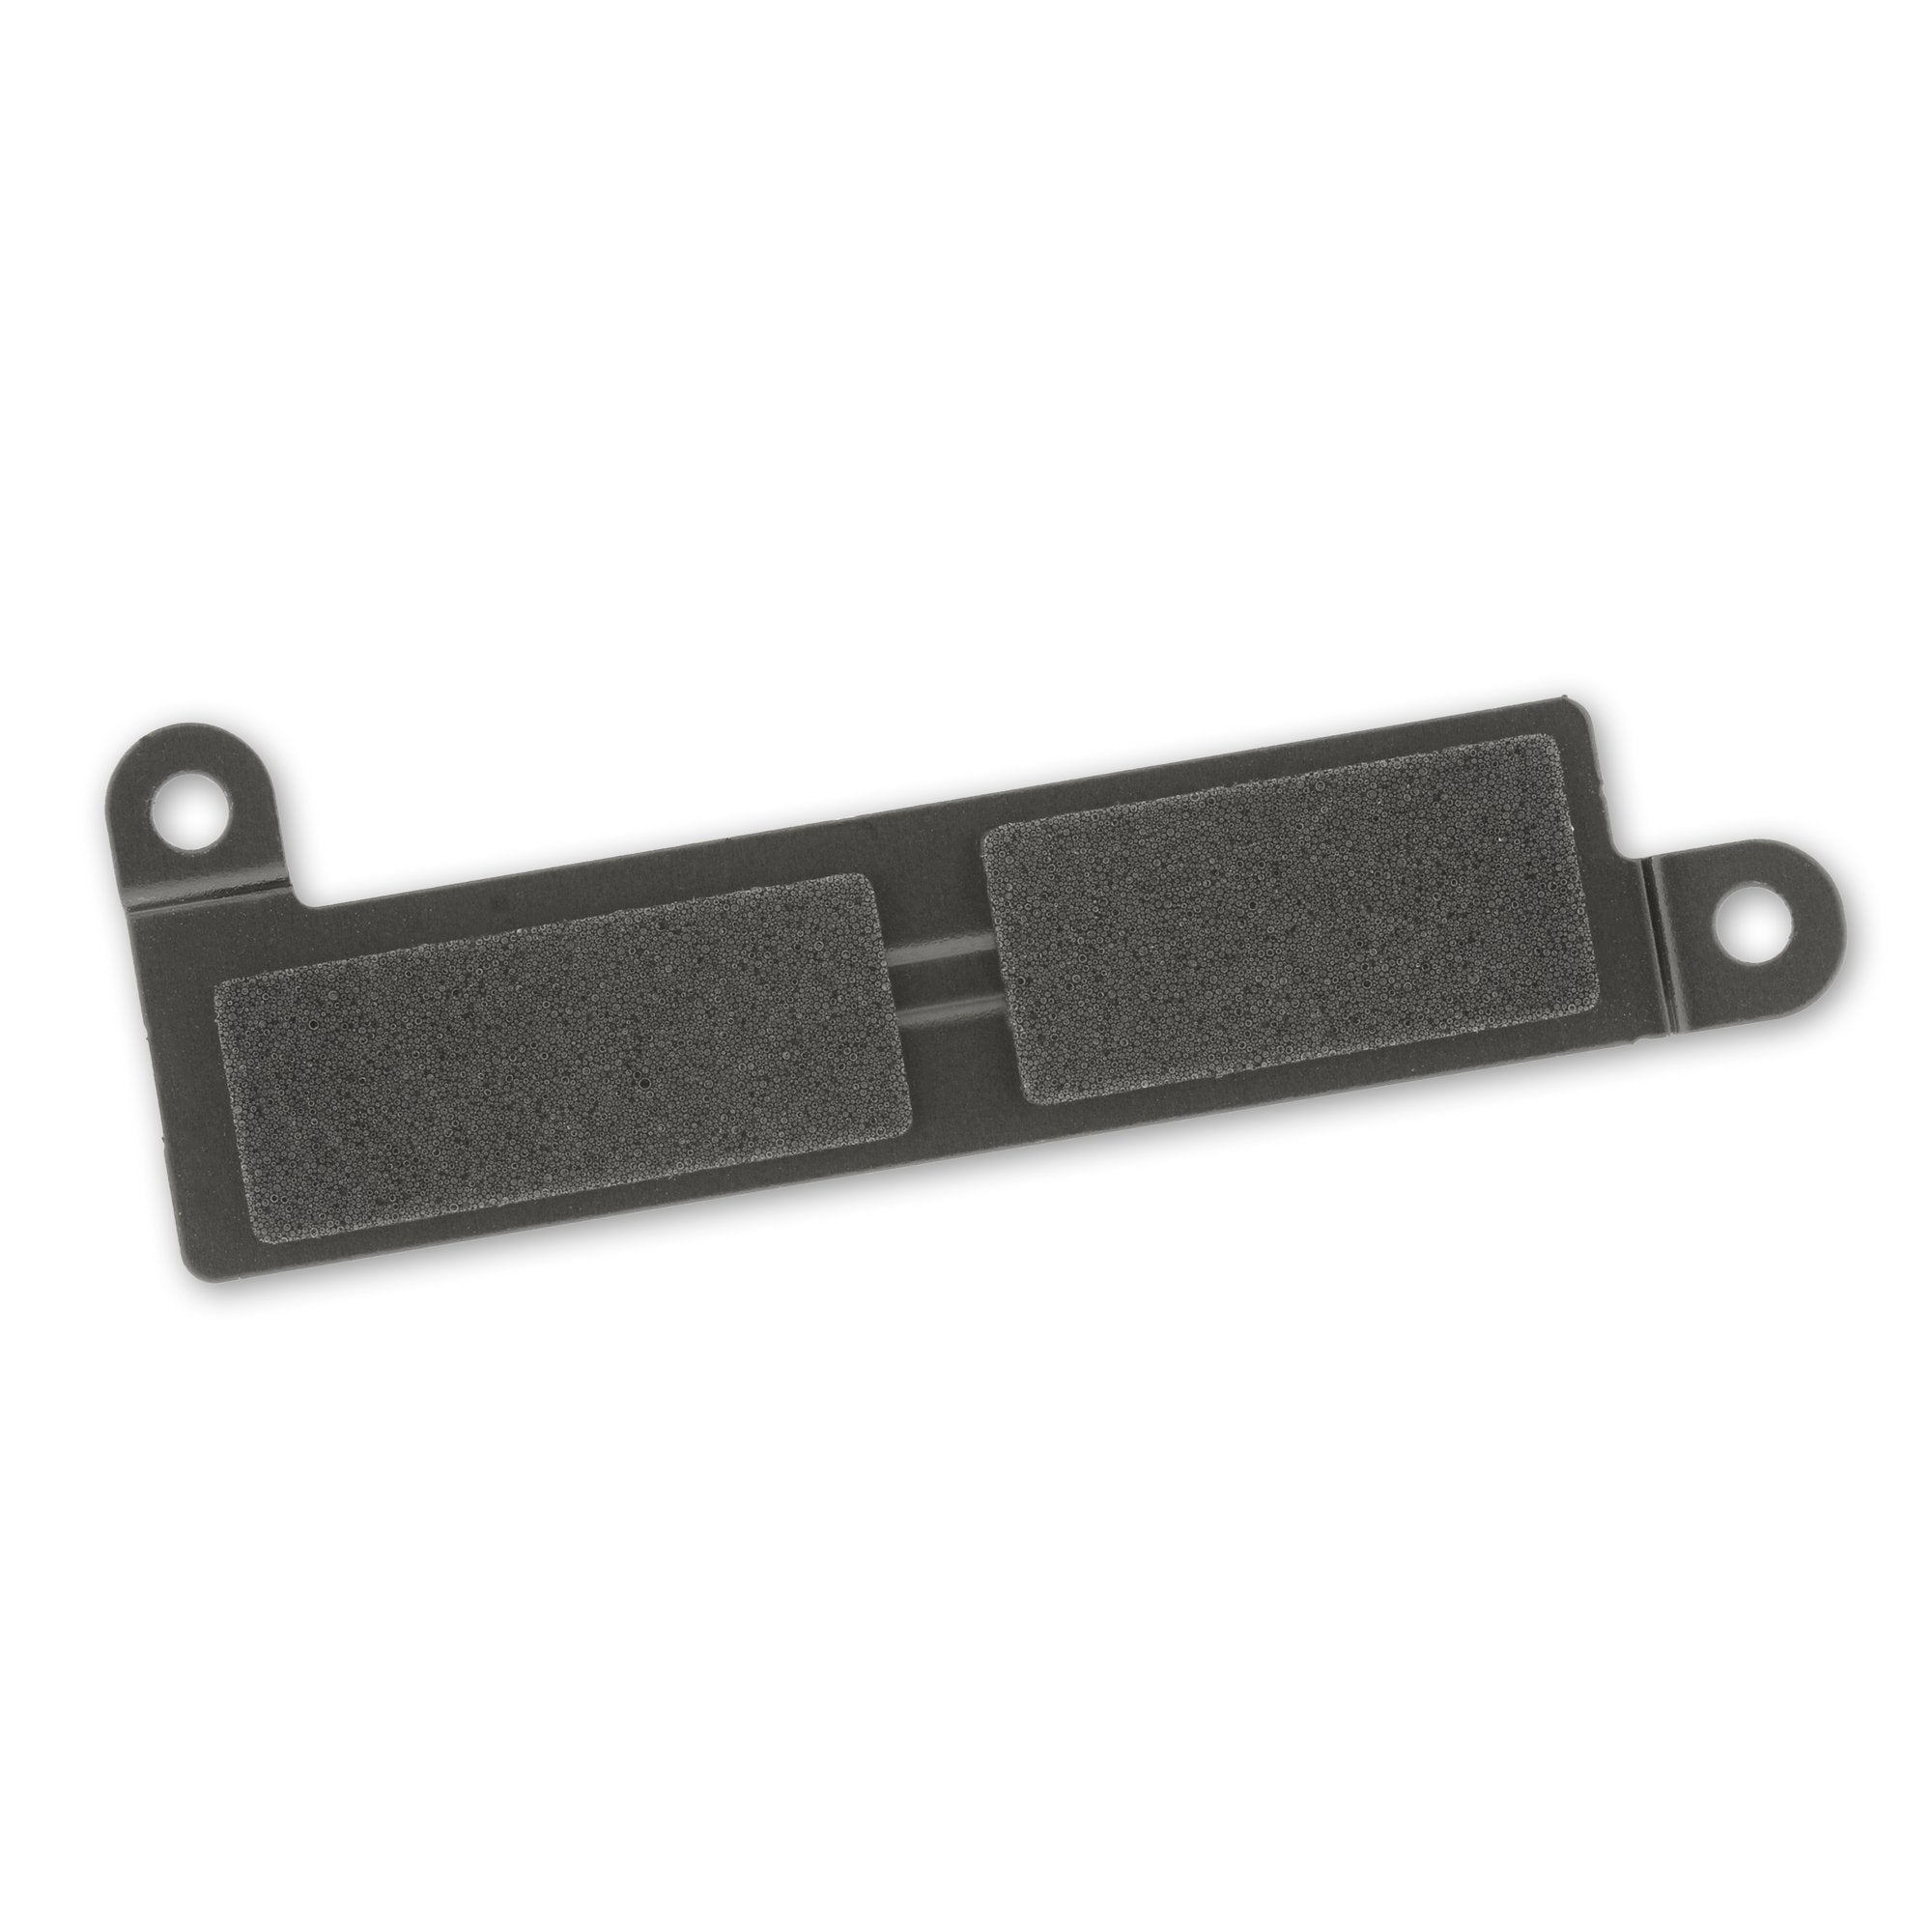 MacBook Pro 15" Retina (Mid 2018-2019) Trackpad and Keyboard Cable Bracket